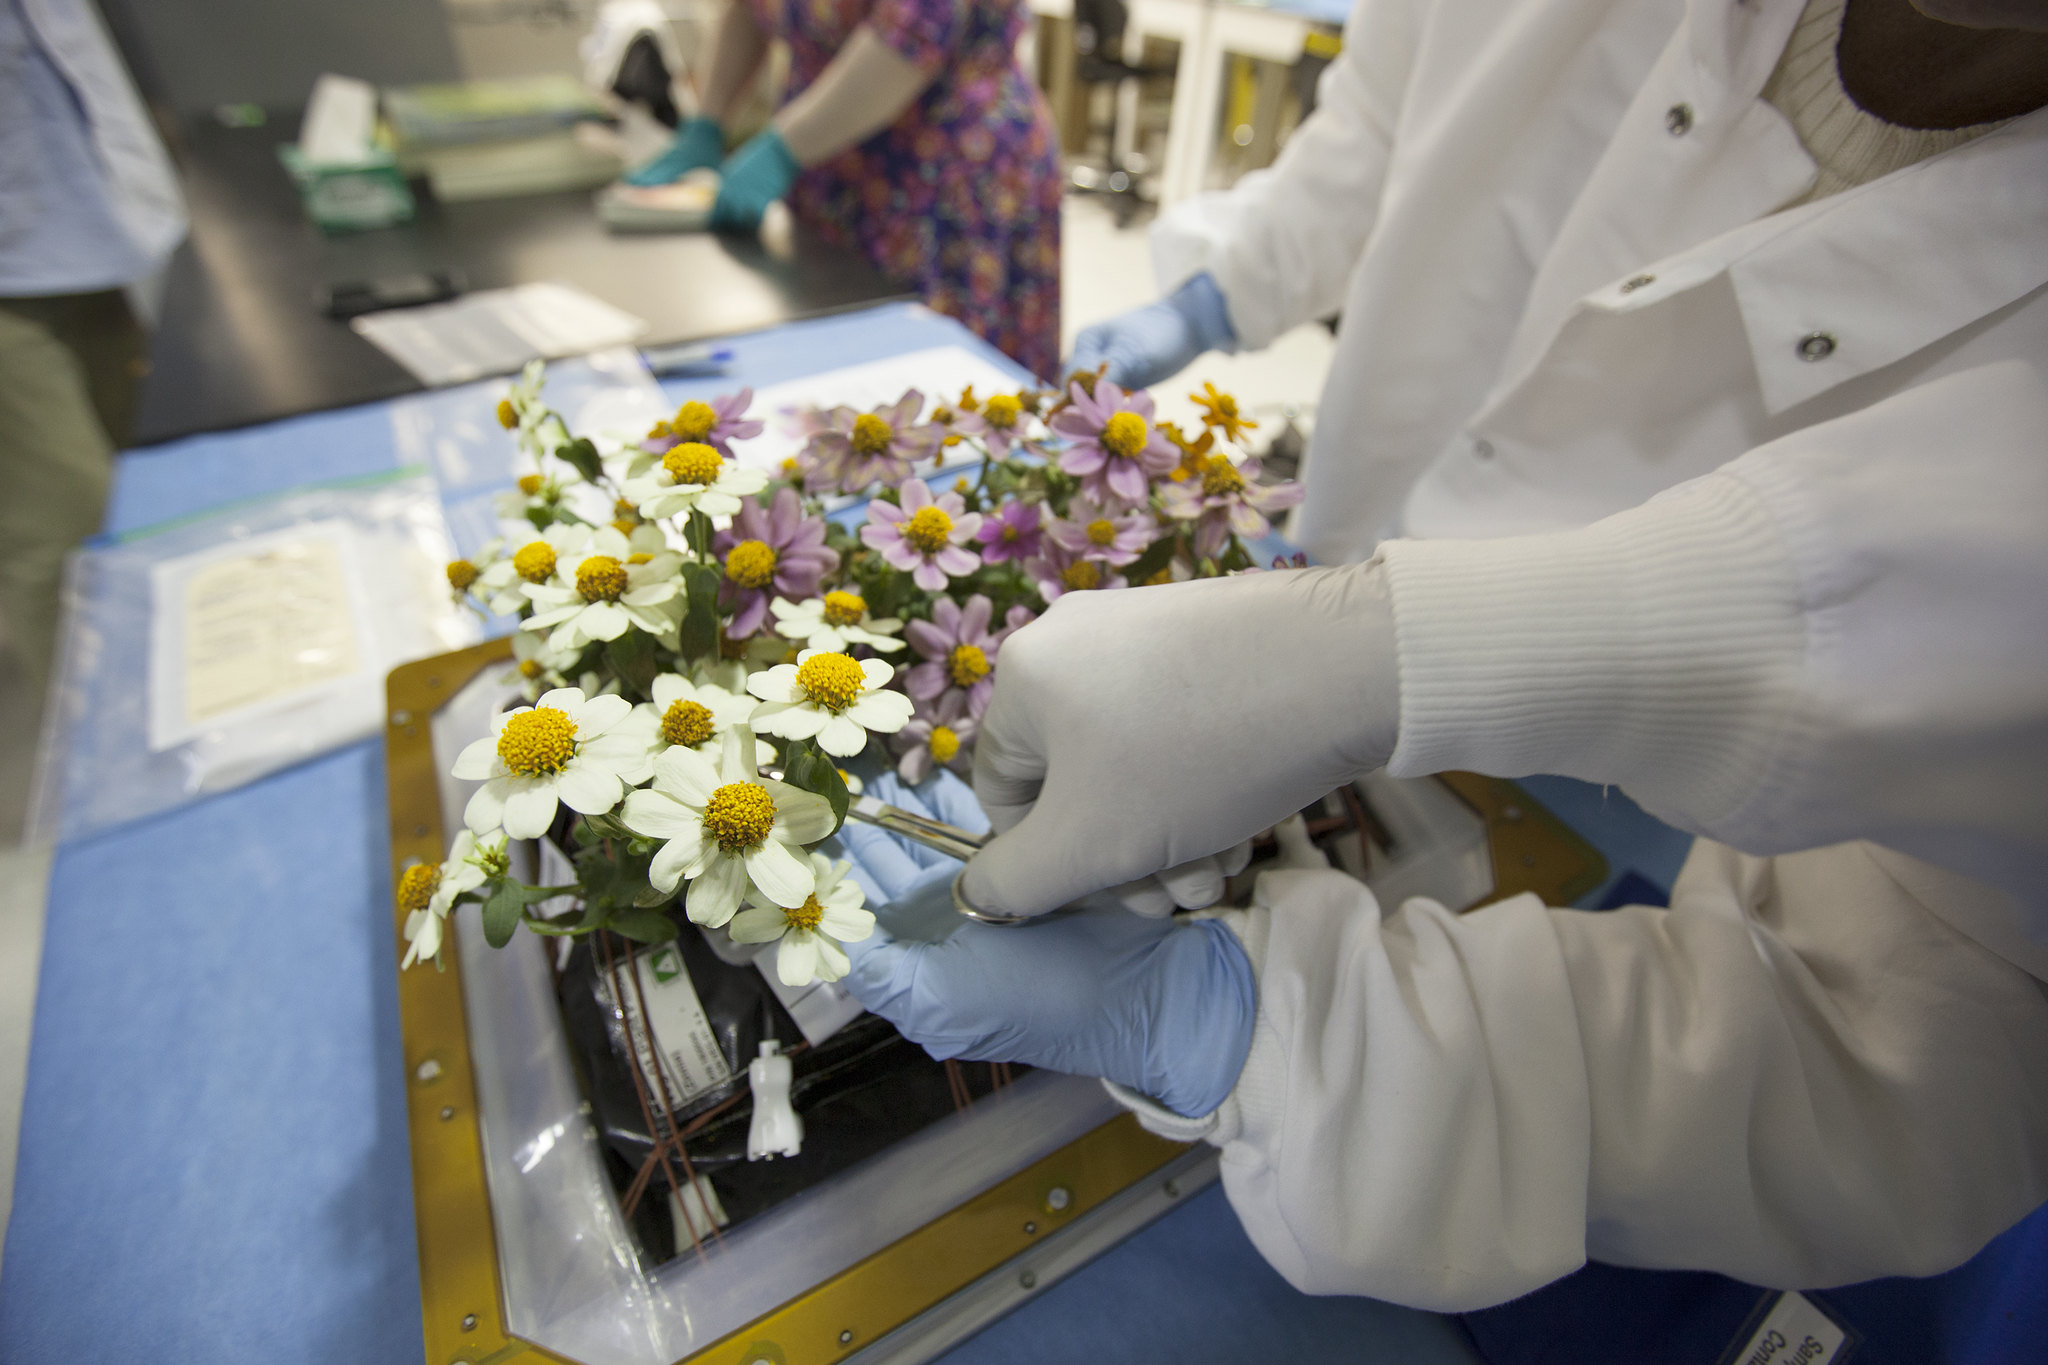 A photo of Zinnia plants from the Veggie ground control system at NASA's Kennedy Space Center in Florida.